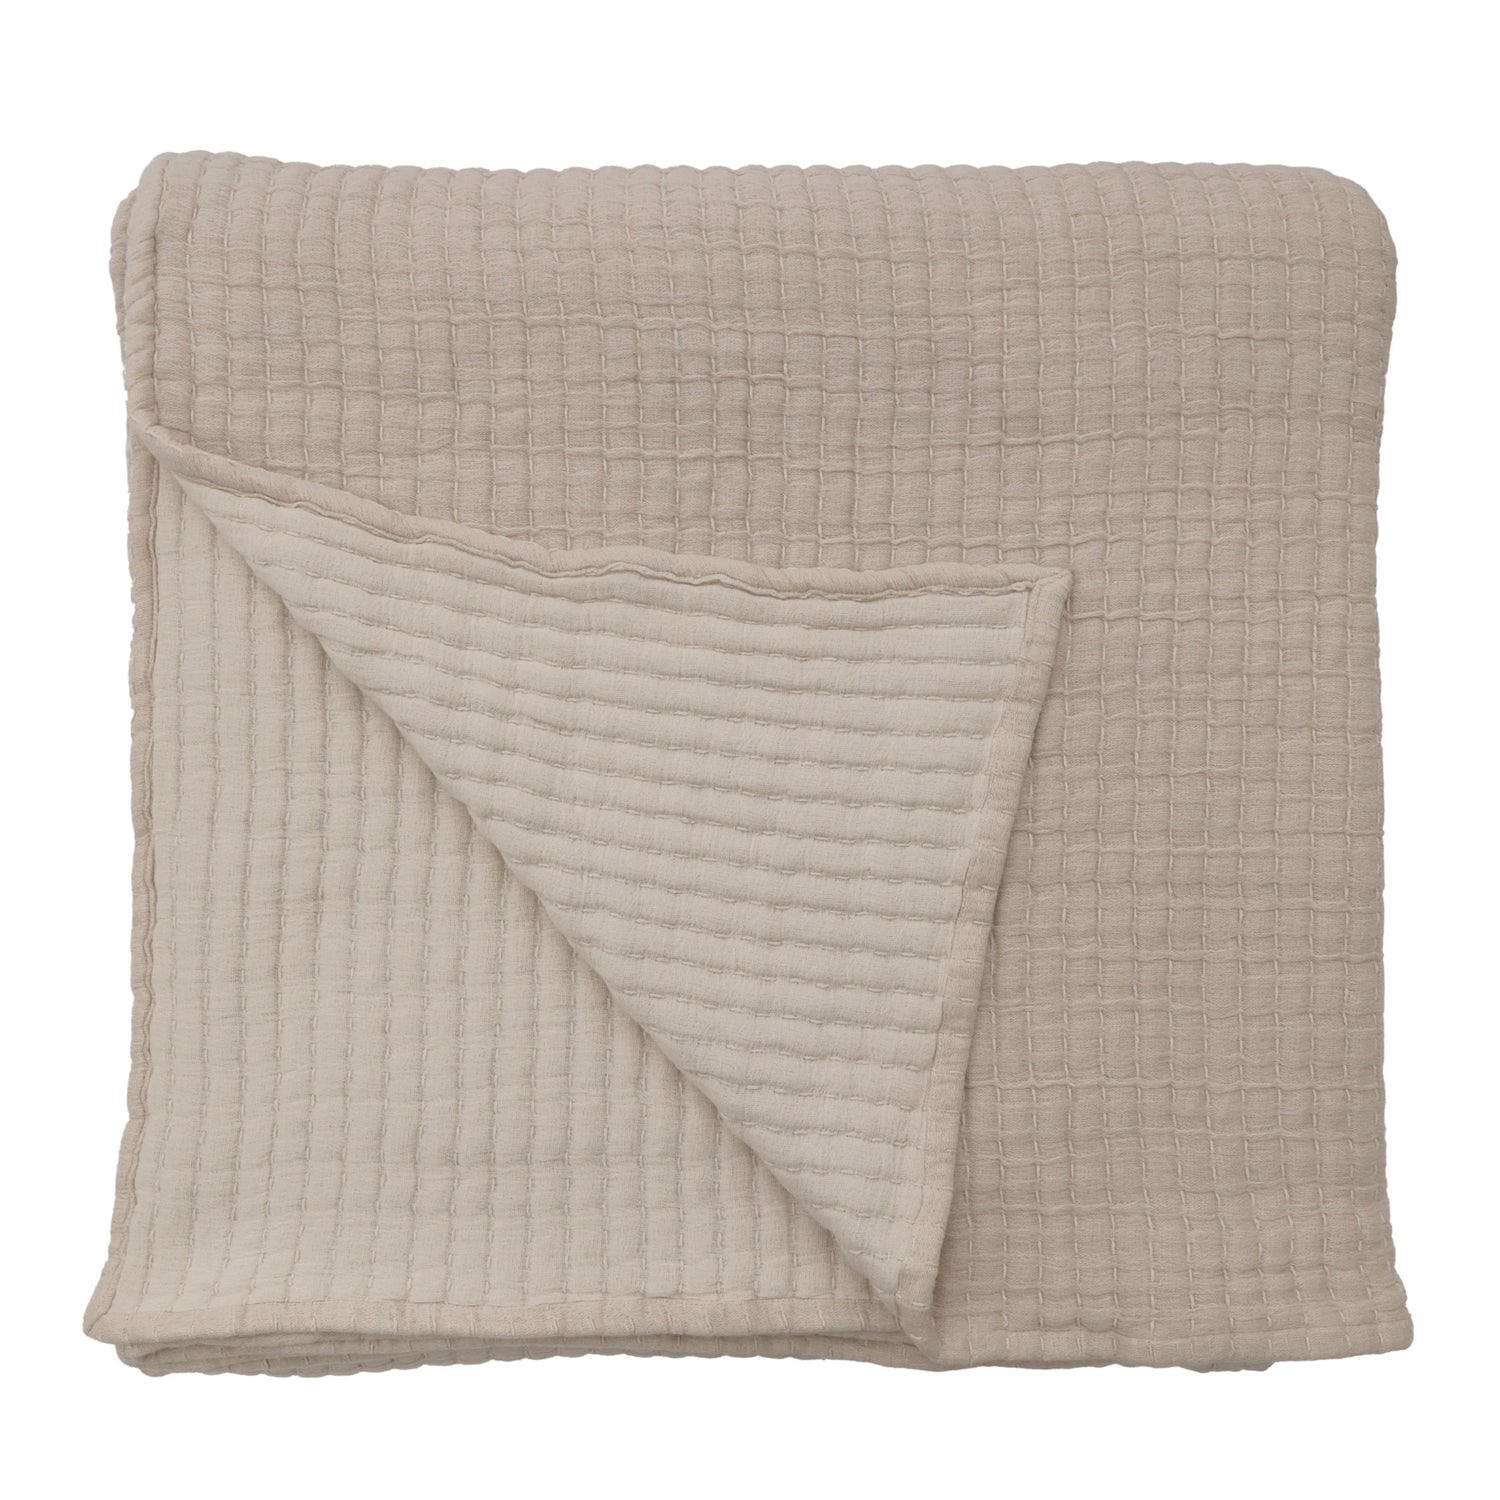 Vancouver Twin Coverlet, Natural